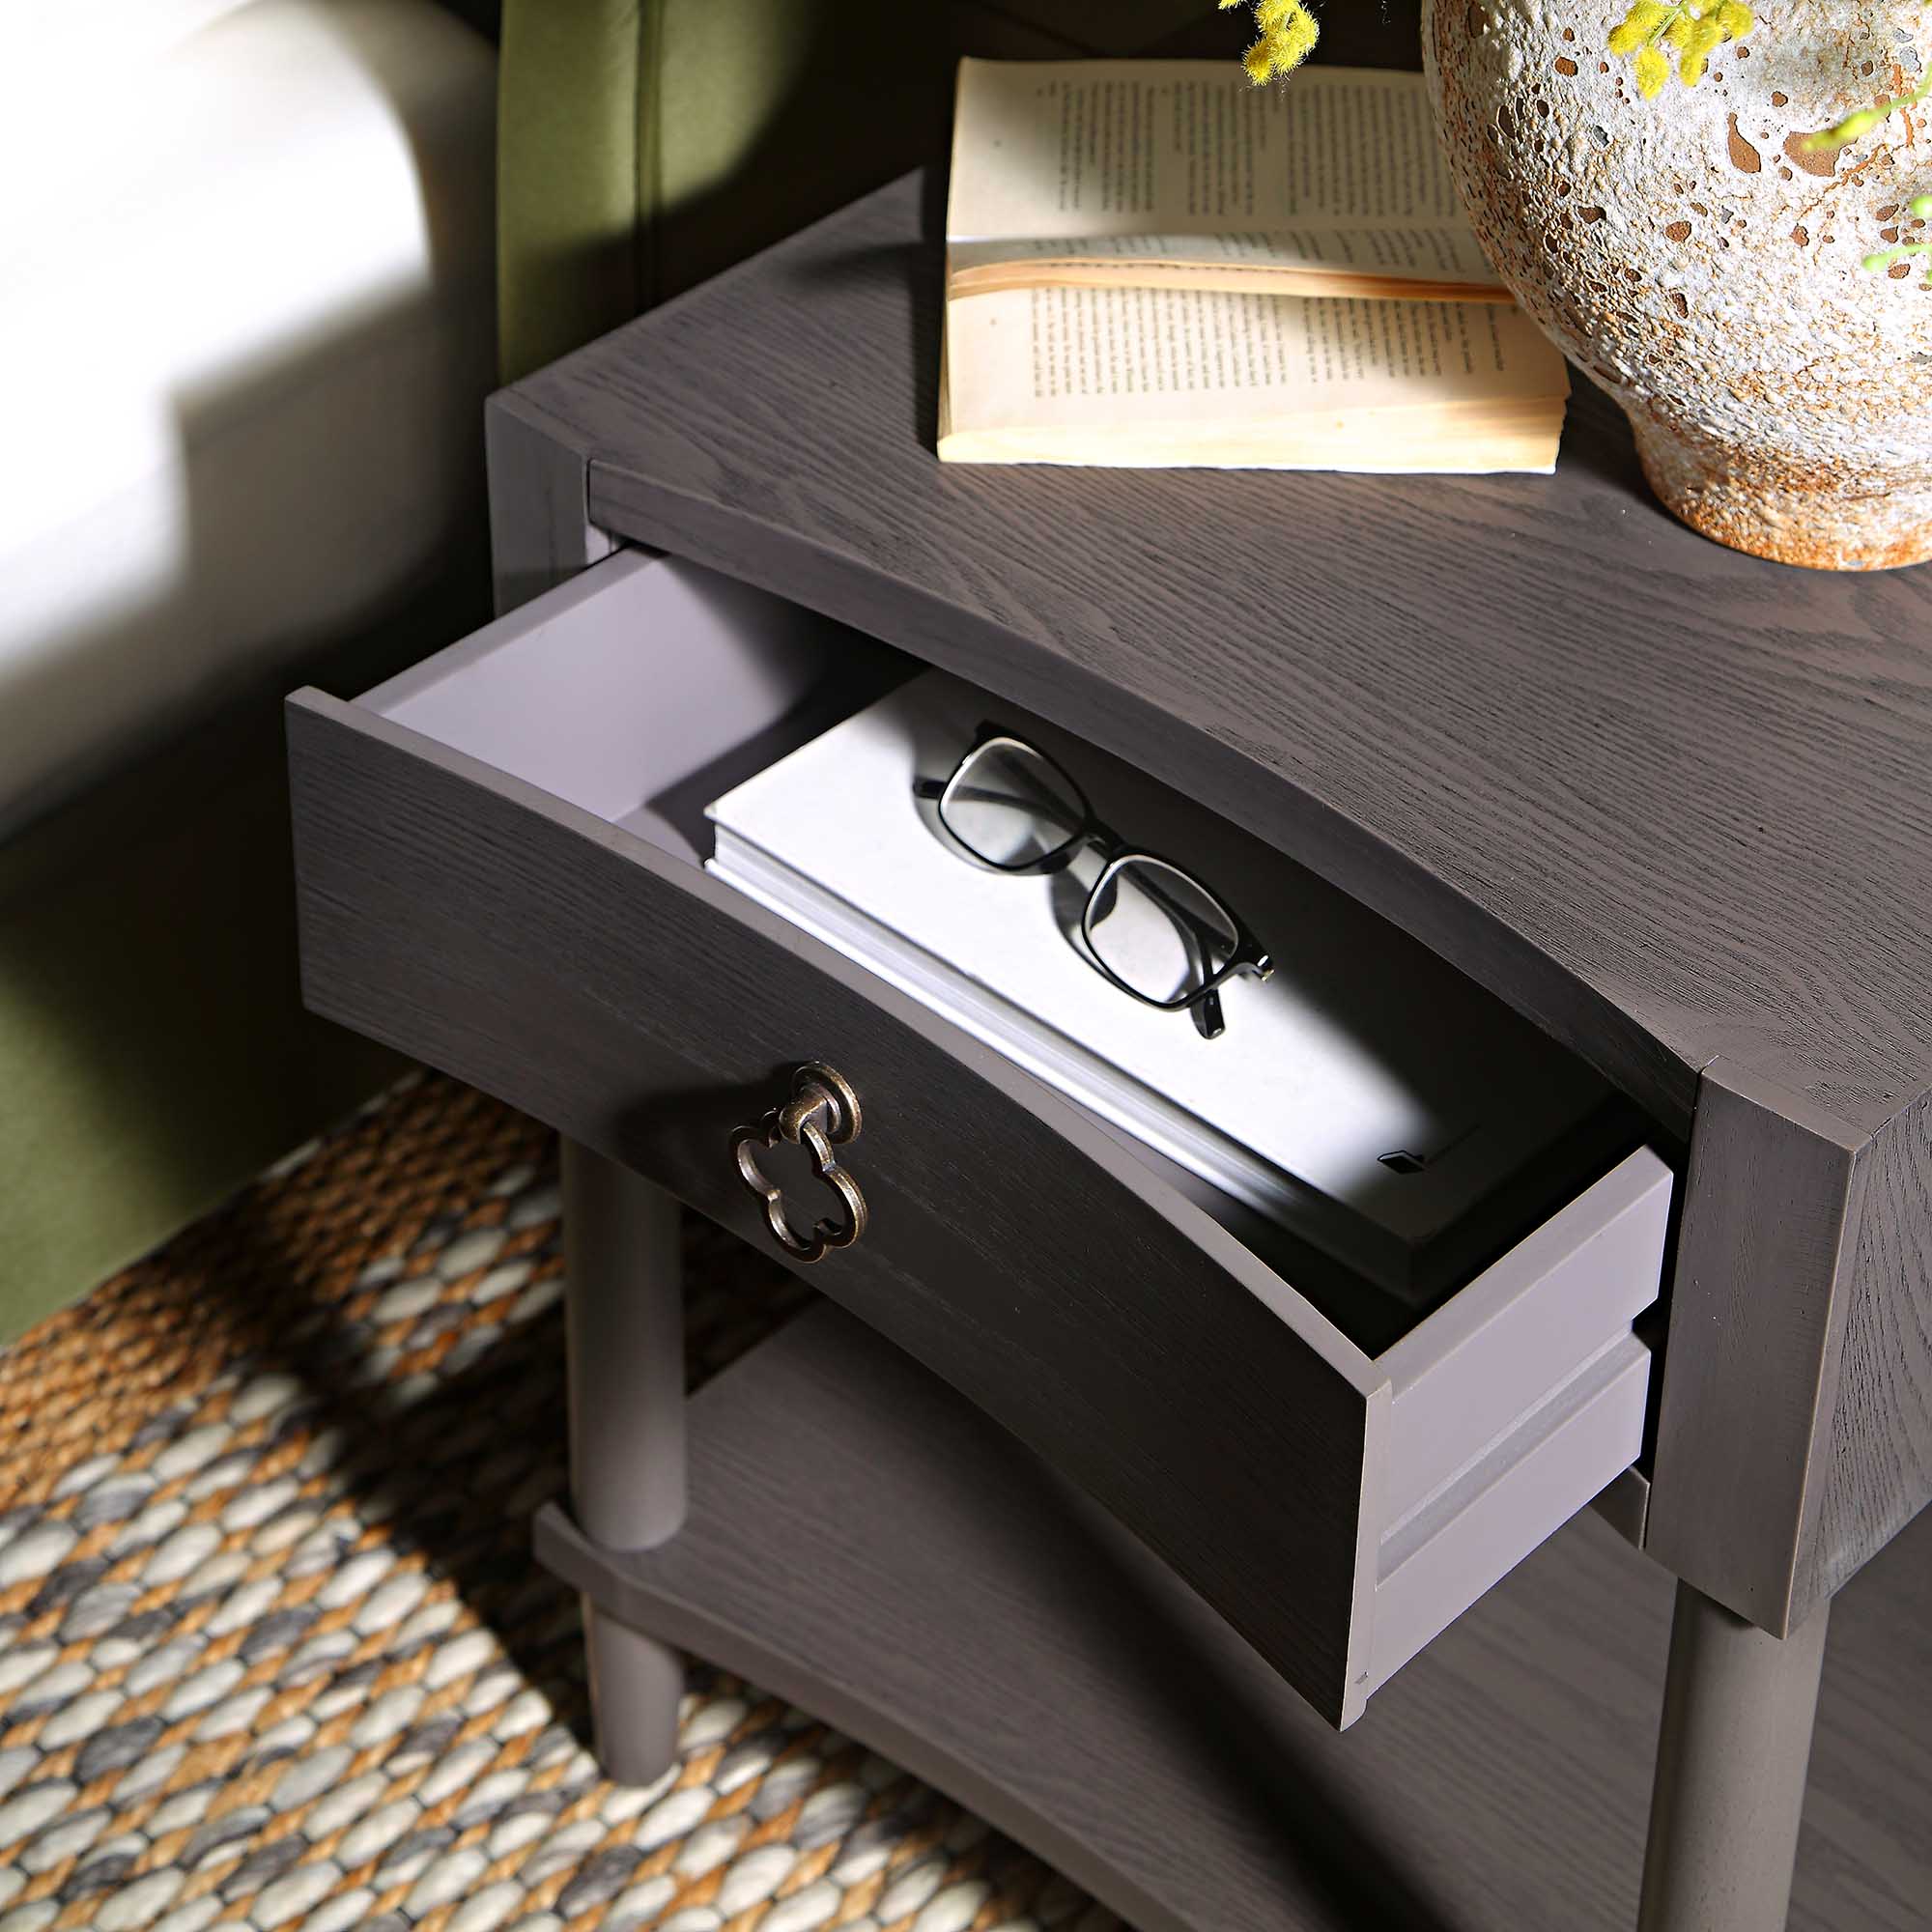 Thalia Concave 1 Drawer Bedside Table, Silver Oak